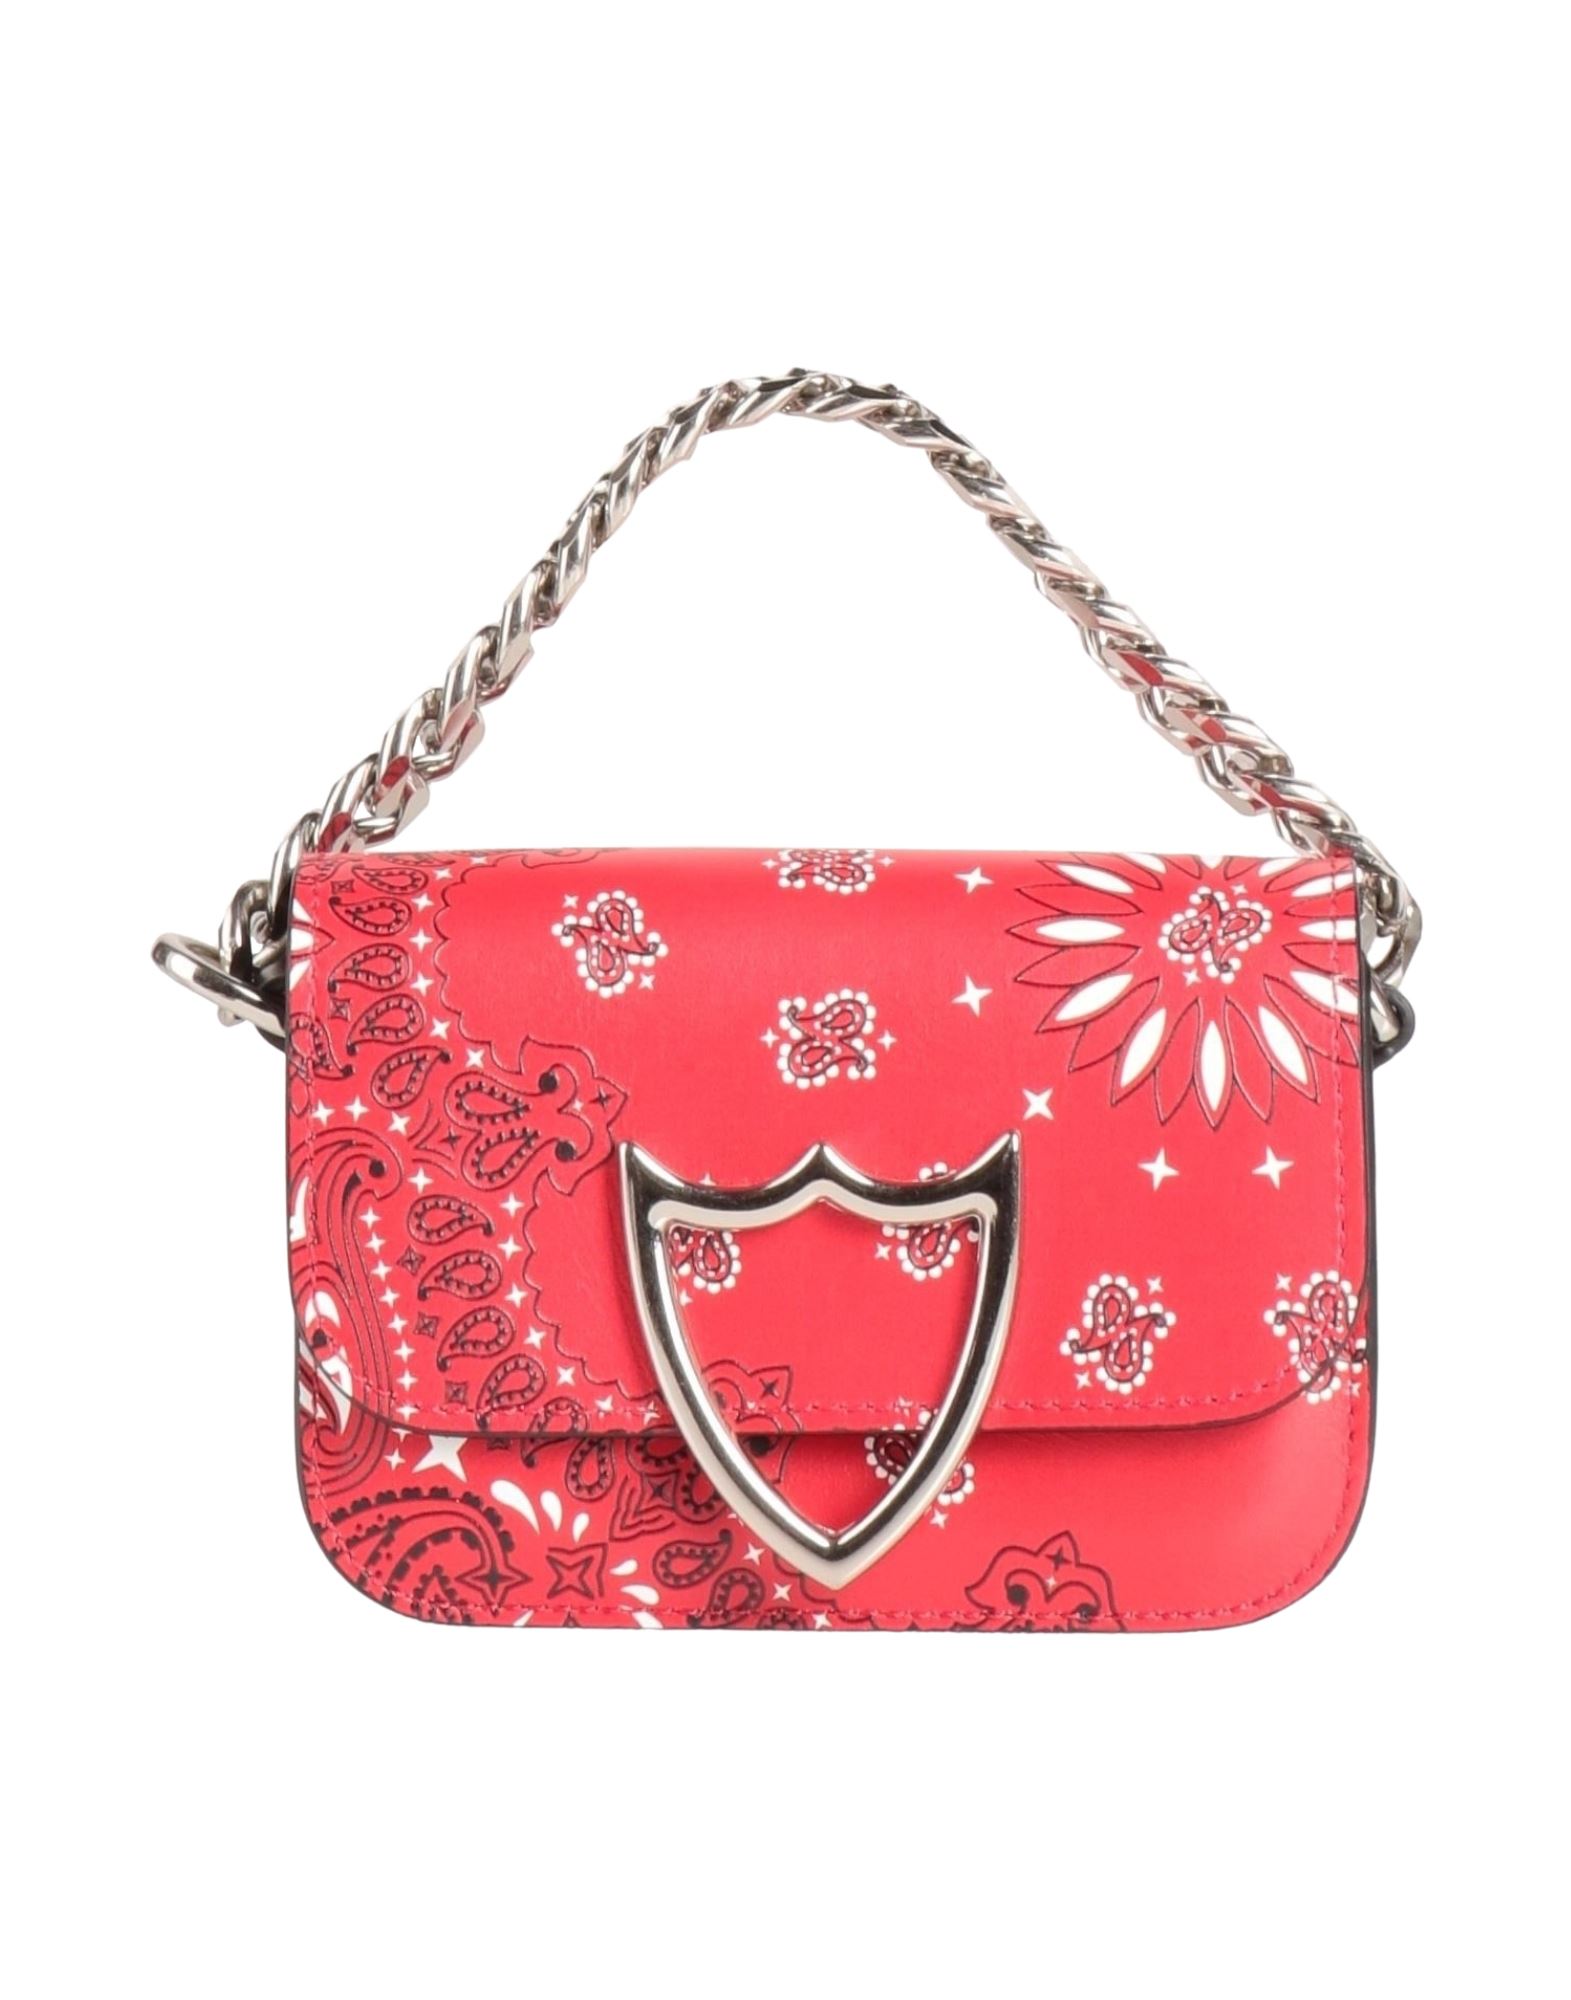 Htc Handbags In Red